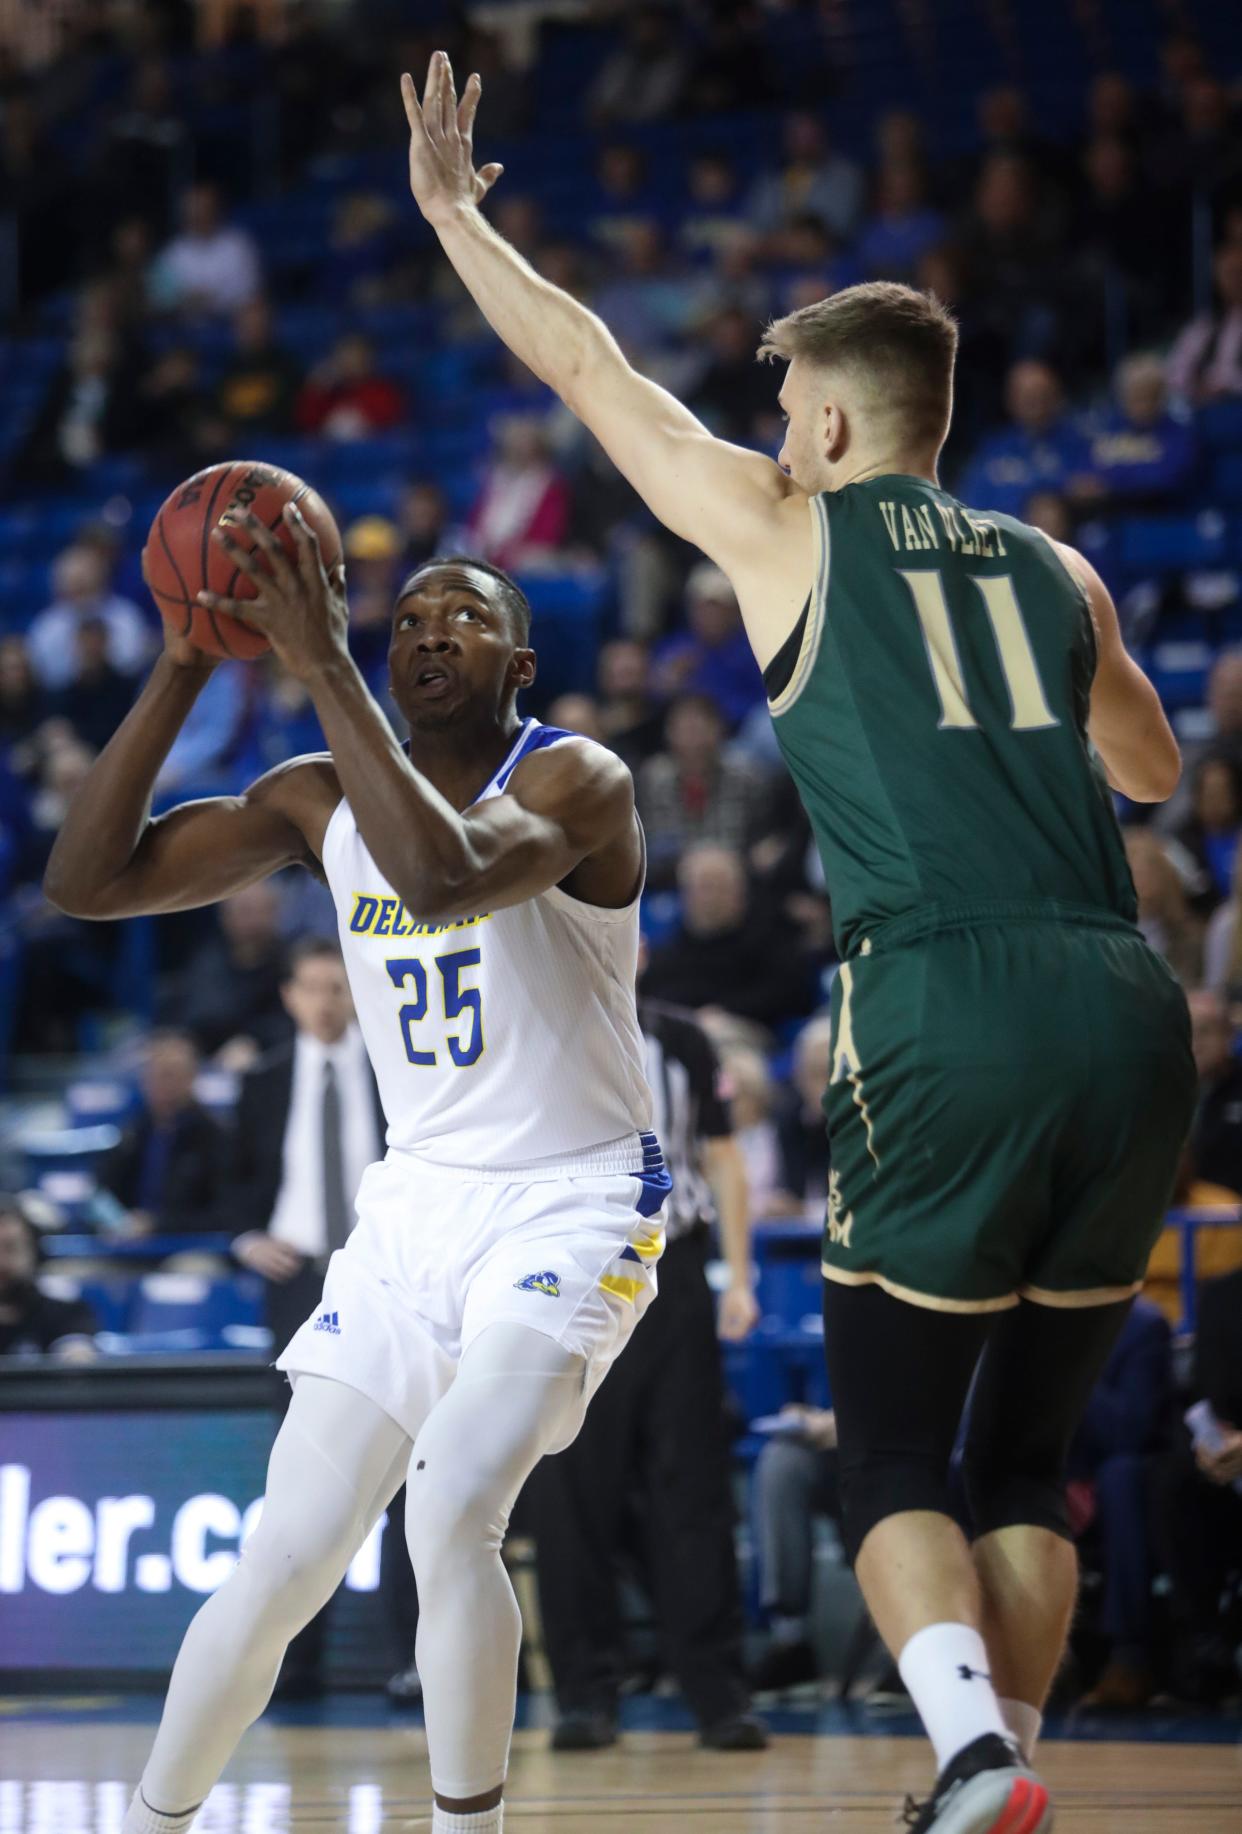 Delaware forward Justyn Mutts looks past William and Mary's Andy Van Vliet in the first half of Delaware's 77-68 loss at the Bob Carpenter Center Thursday.